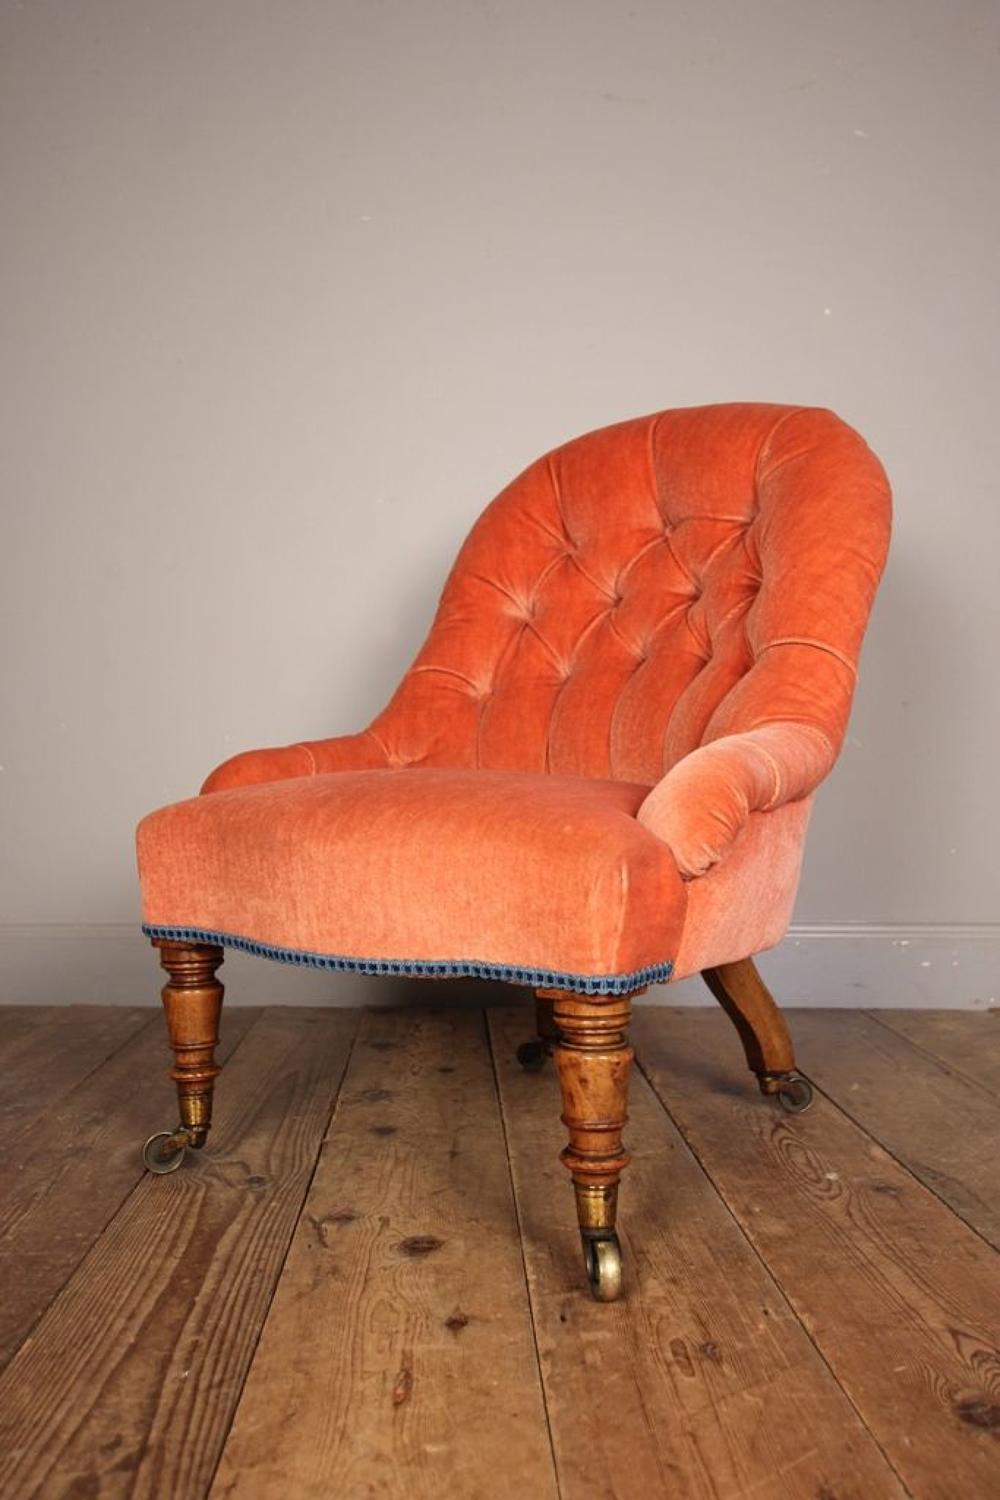 Super Quality 19th C Bedroom Chair